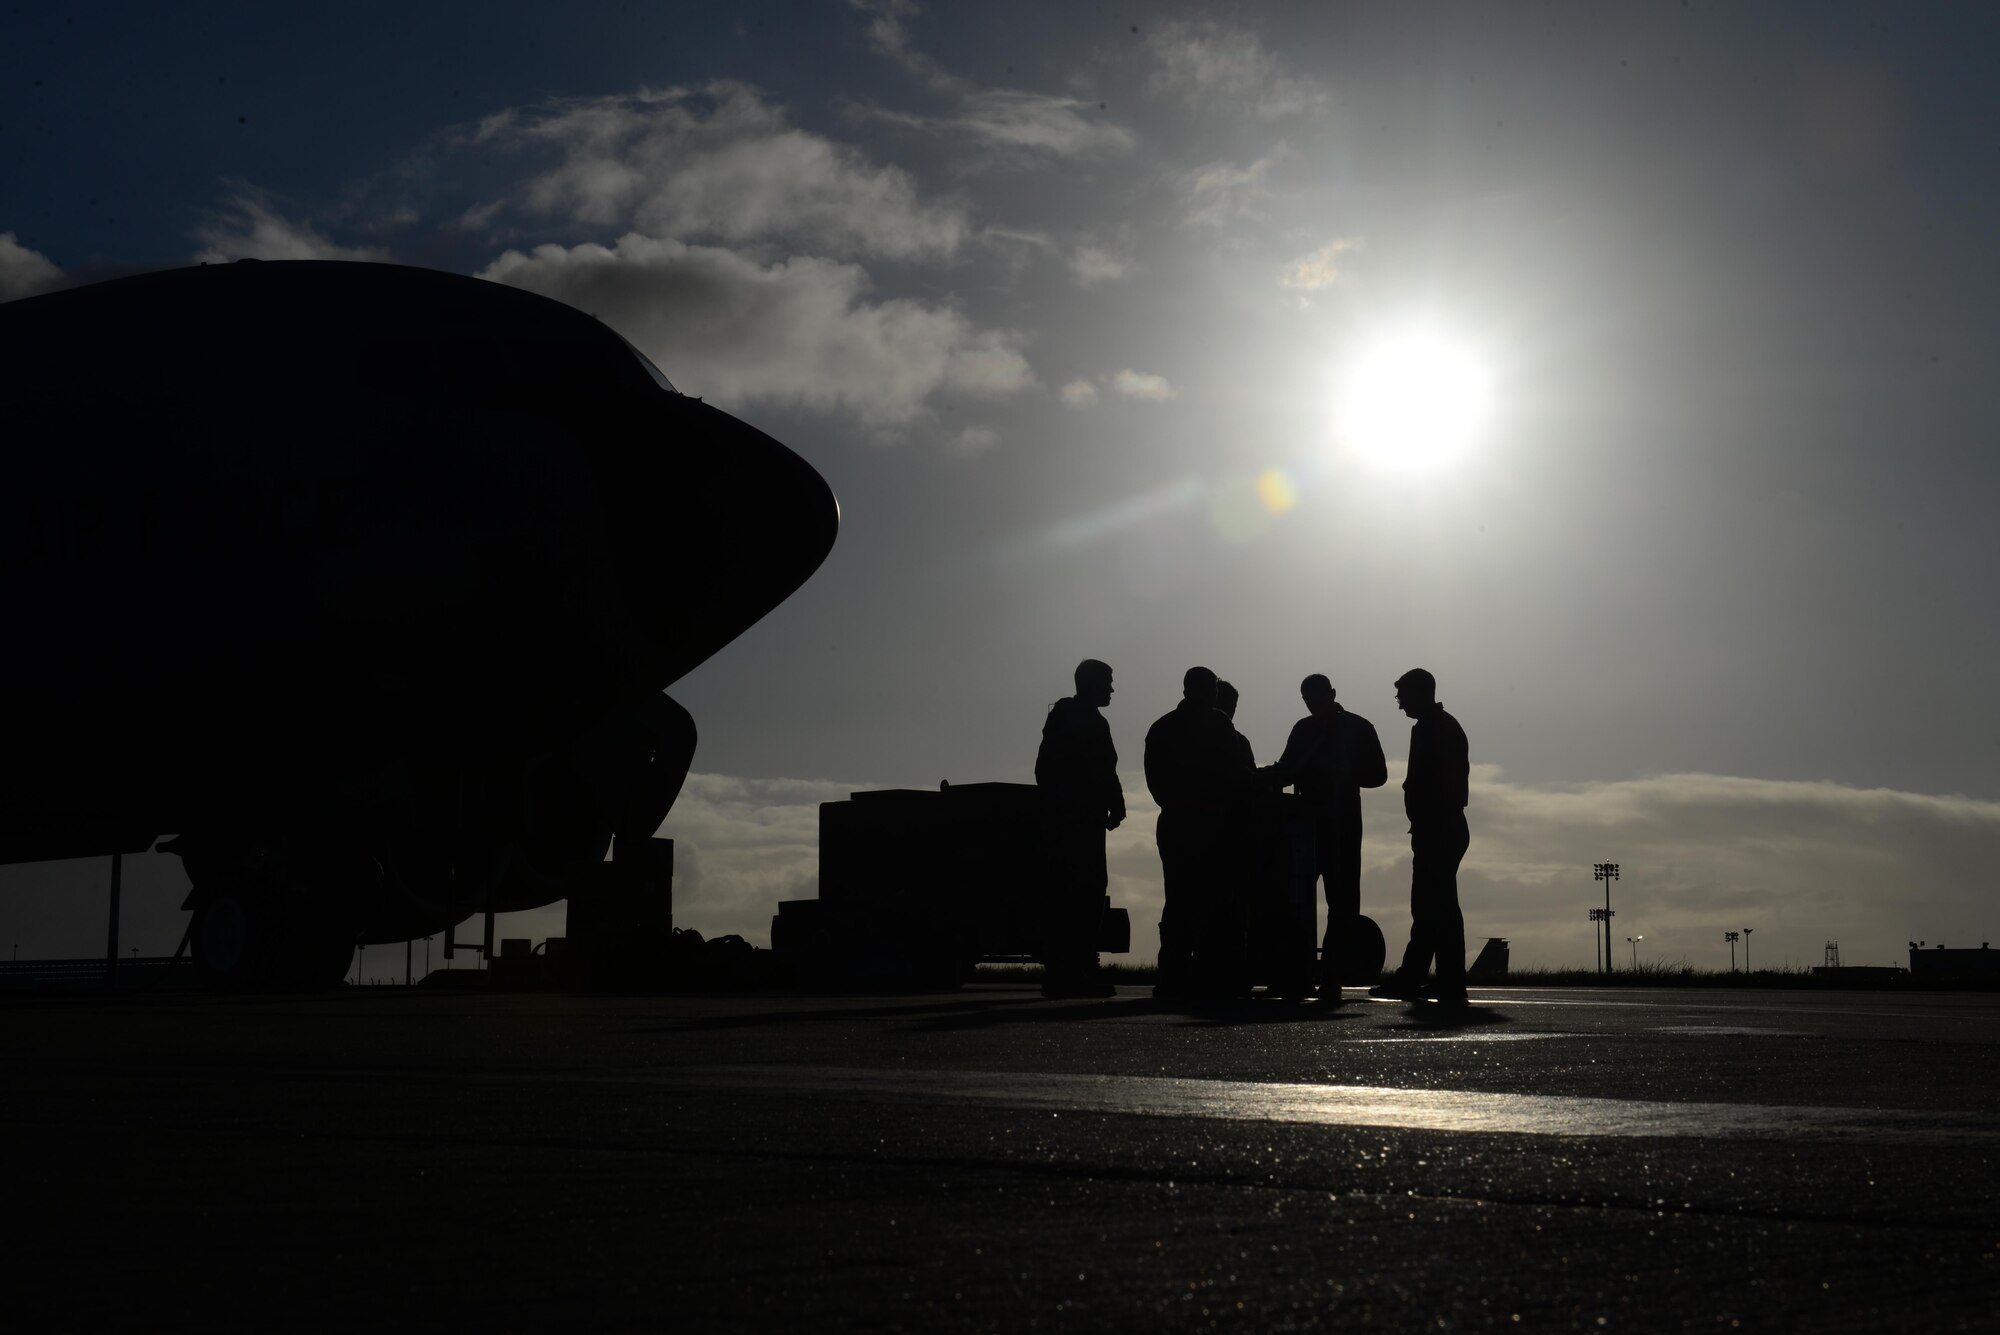 U.S. Air Force Airmen from the 100th Air Refueling Wing conduct a preflight briefing April 18, 2017 on RAF Mildenhall, England. Airmen from the 100th ARW flew to Rota Naval Air Station, Spain, to support African Lion, an exercise aimed toward strengthening relationships with U.S. allies and partners. (U.S. Air Force photo by Staff Sgt. Micaiah Anthony)